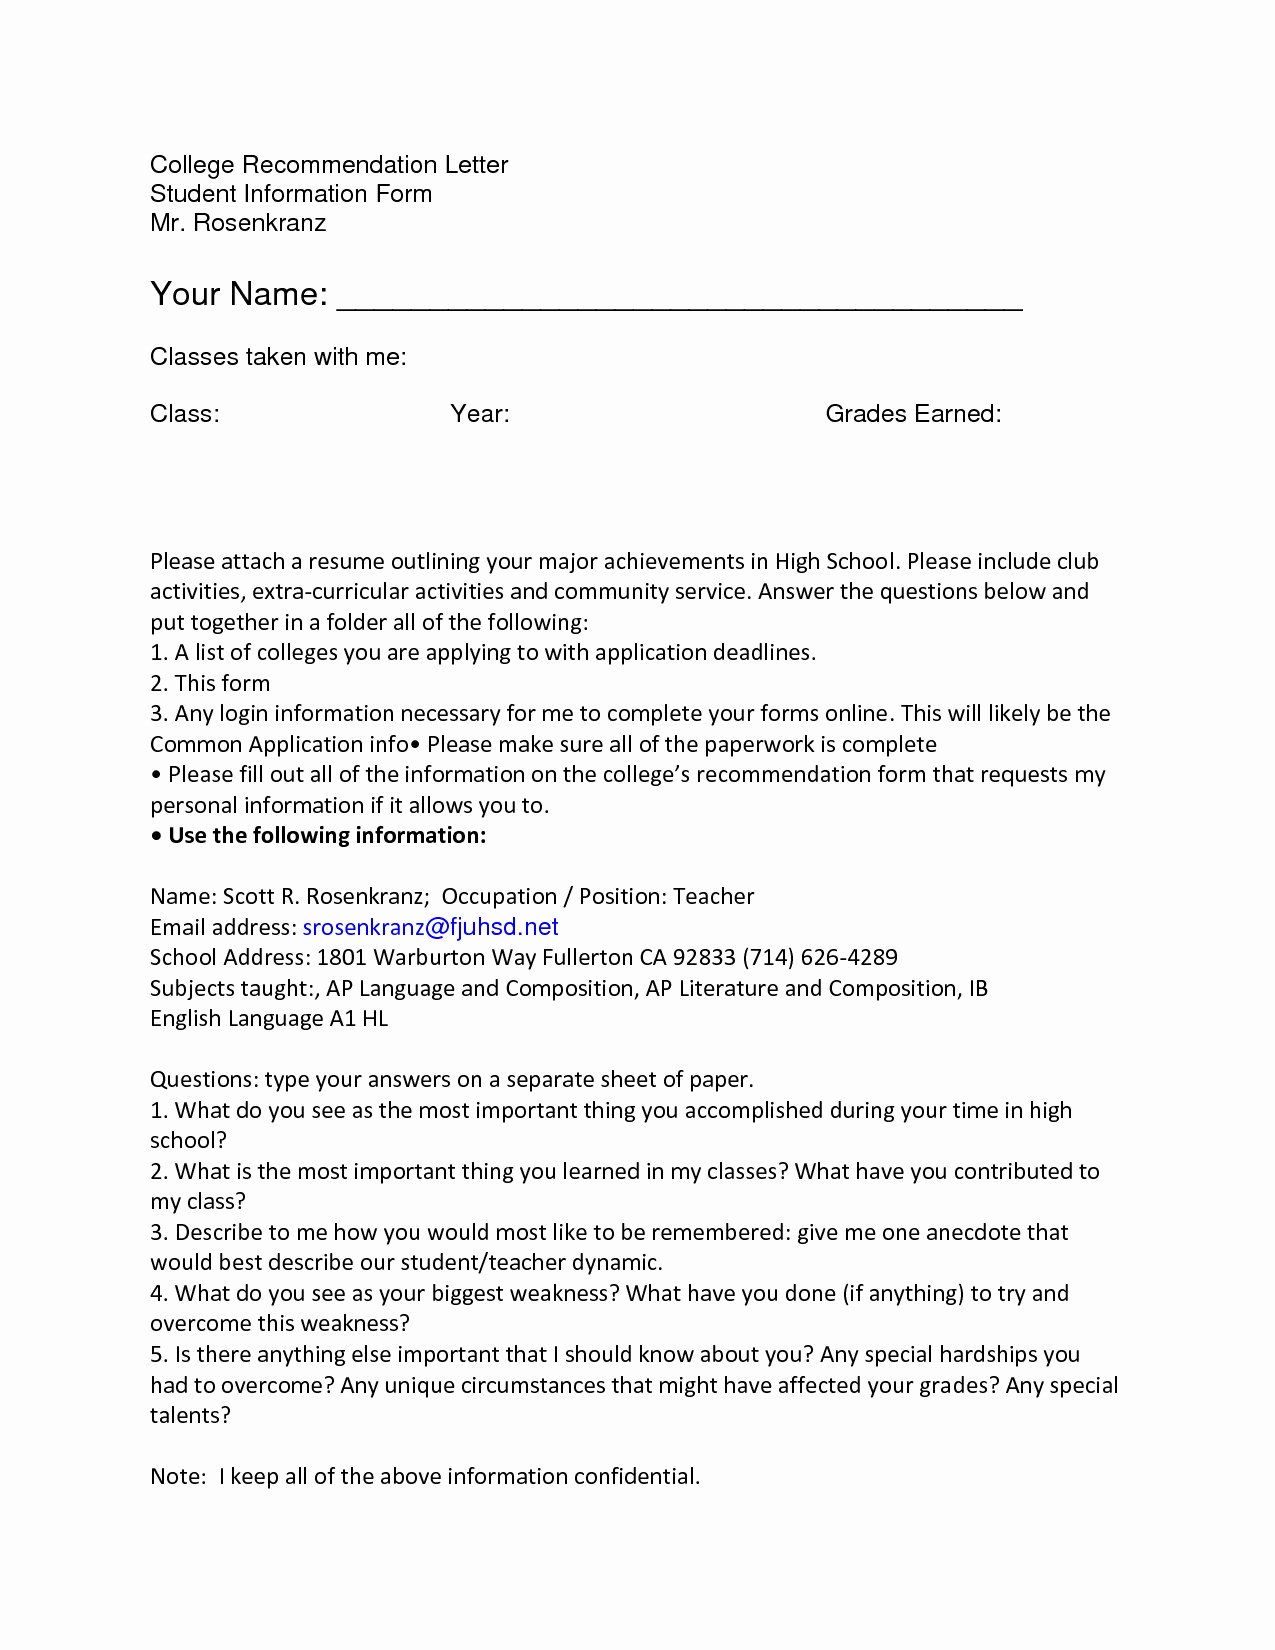 Letters Of Reference for College New 12 13 Write A Letter Of Rec Endation